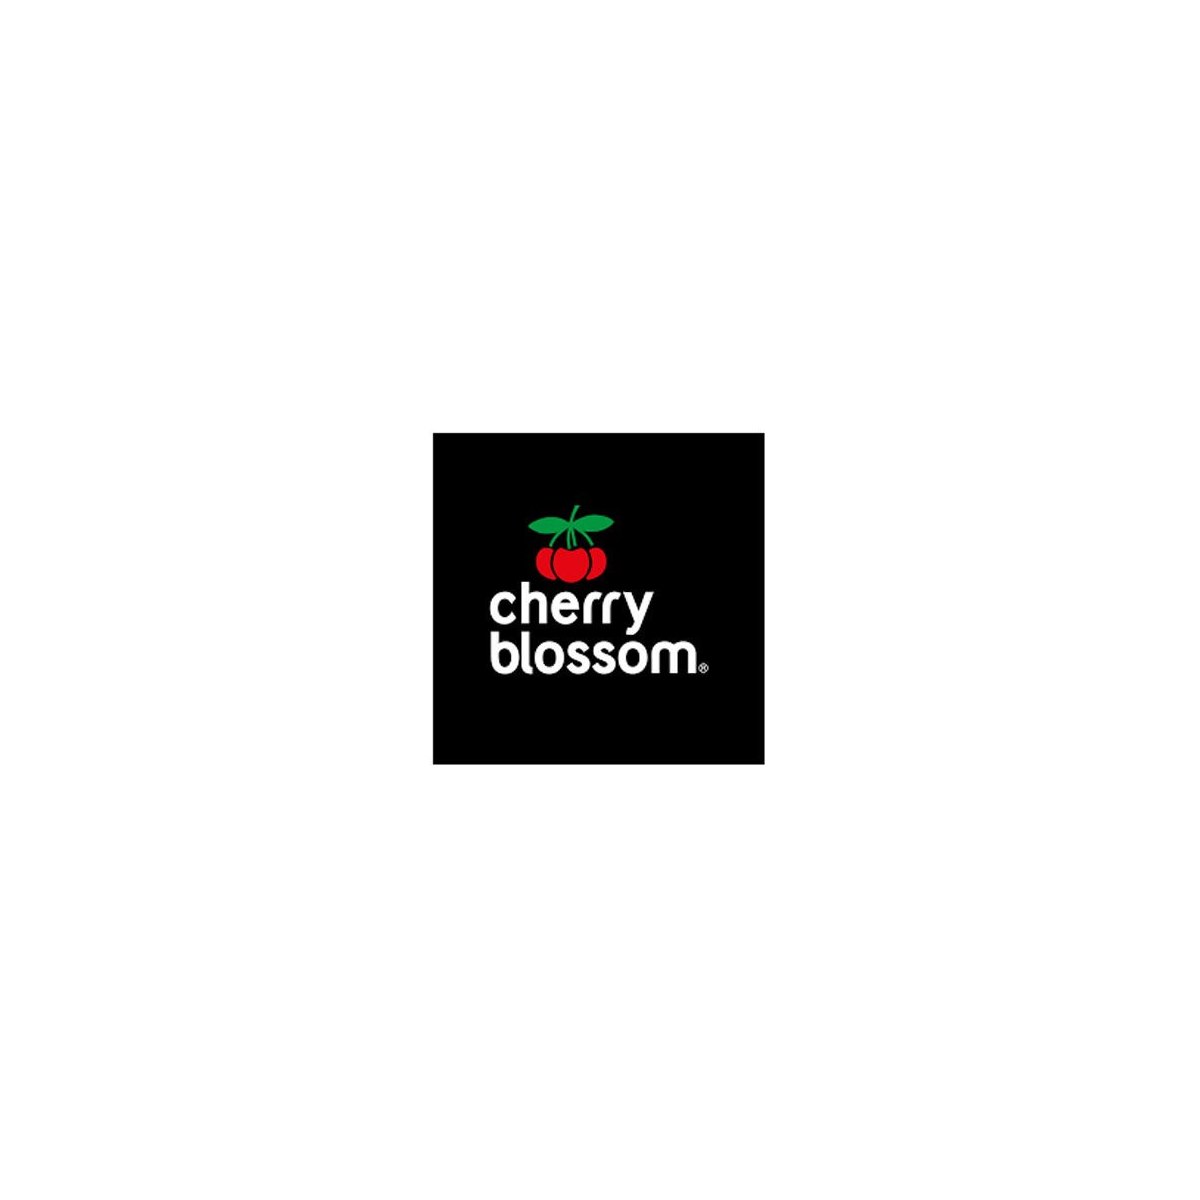 Where to Buy Cherry Blossom Products